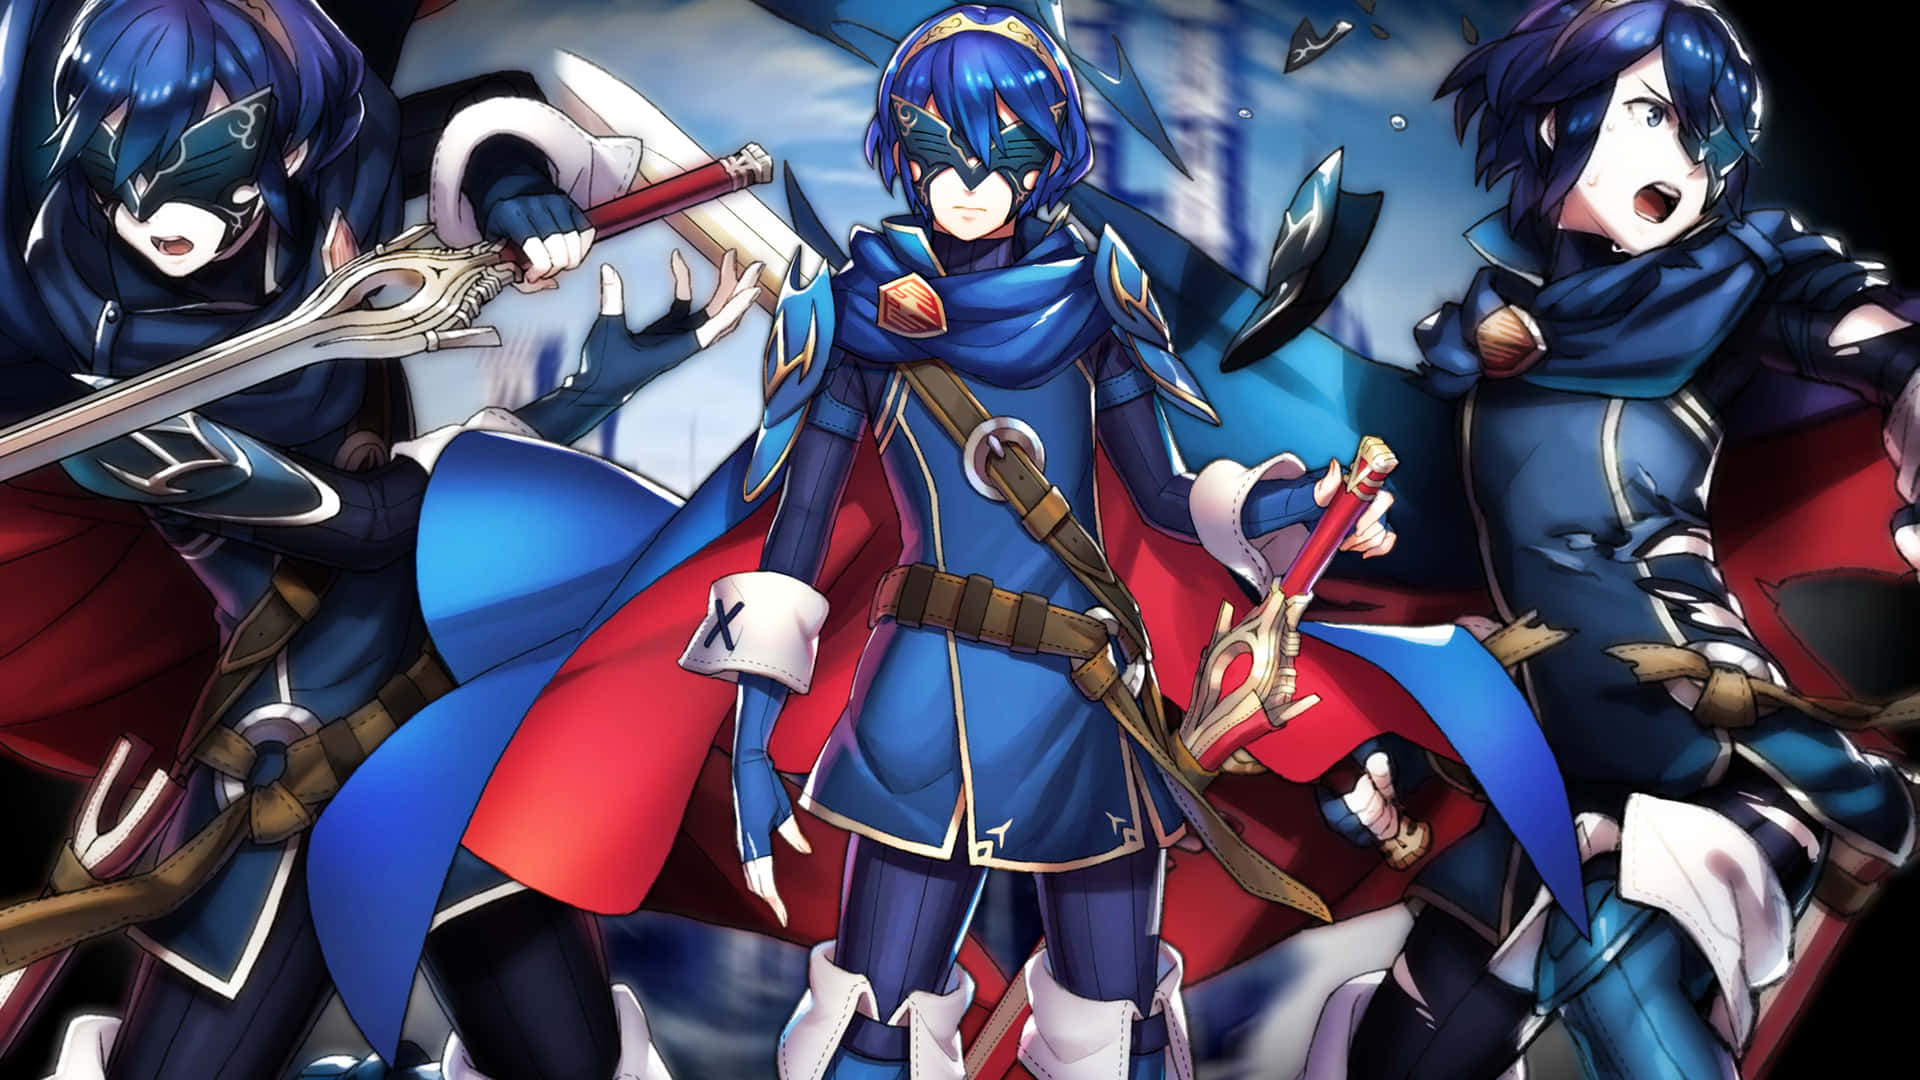 Lucina from the Fire Emblem franchise takes her place as the leader of her people in battle. Wallpaper